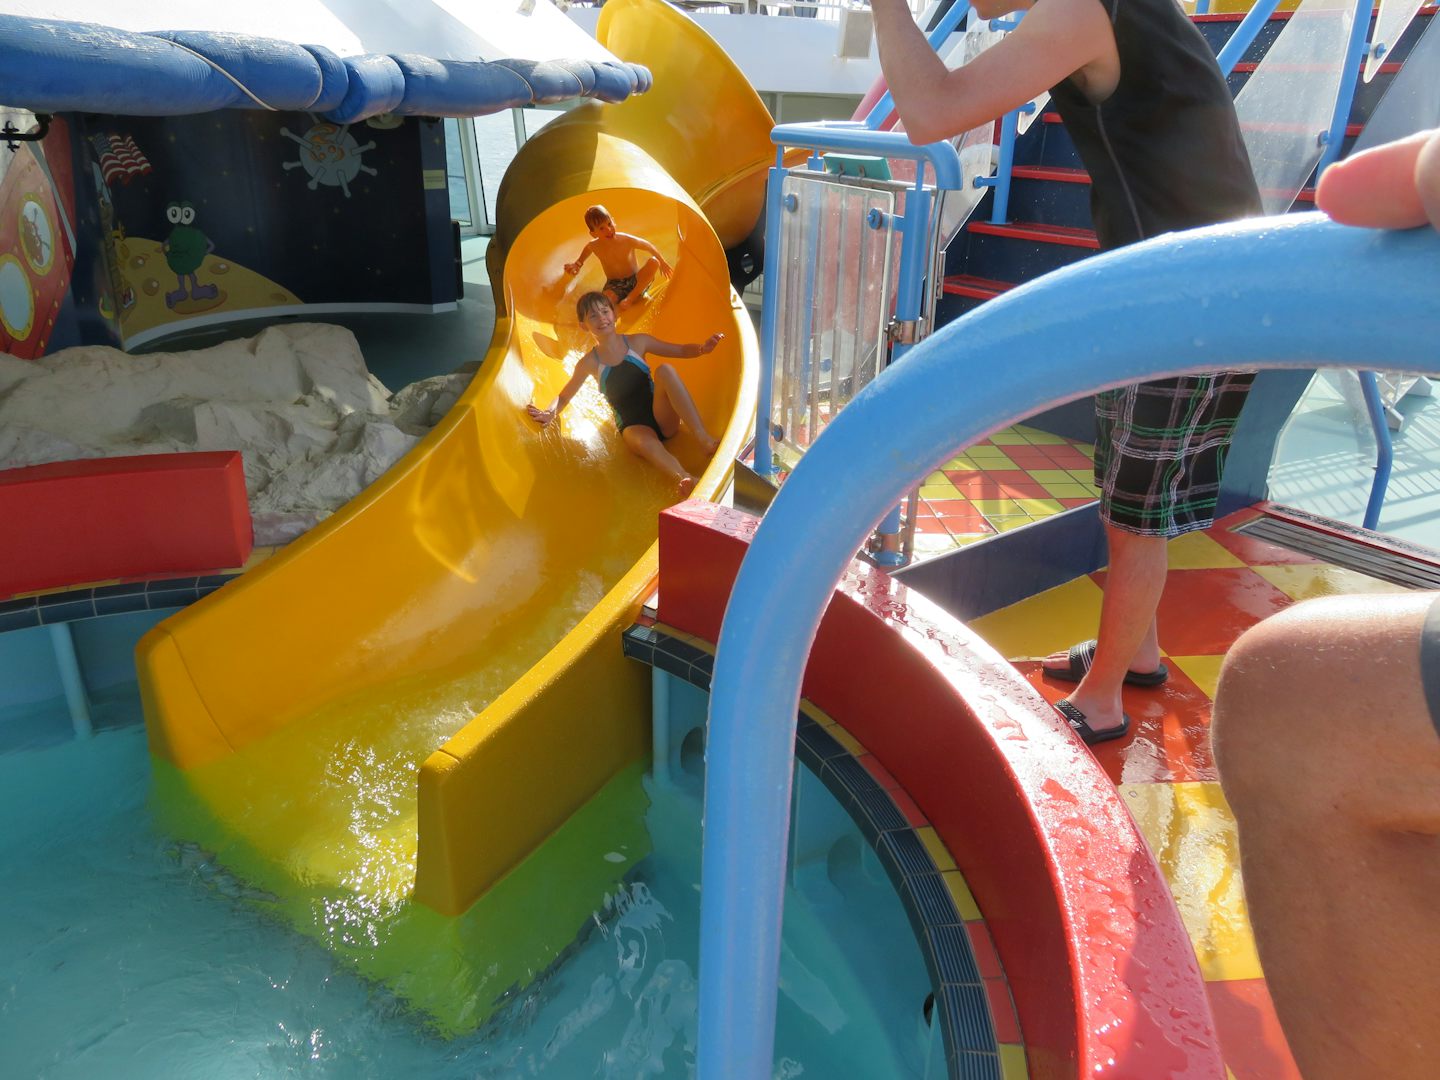 The kid's loved the water slides.